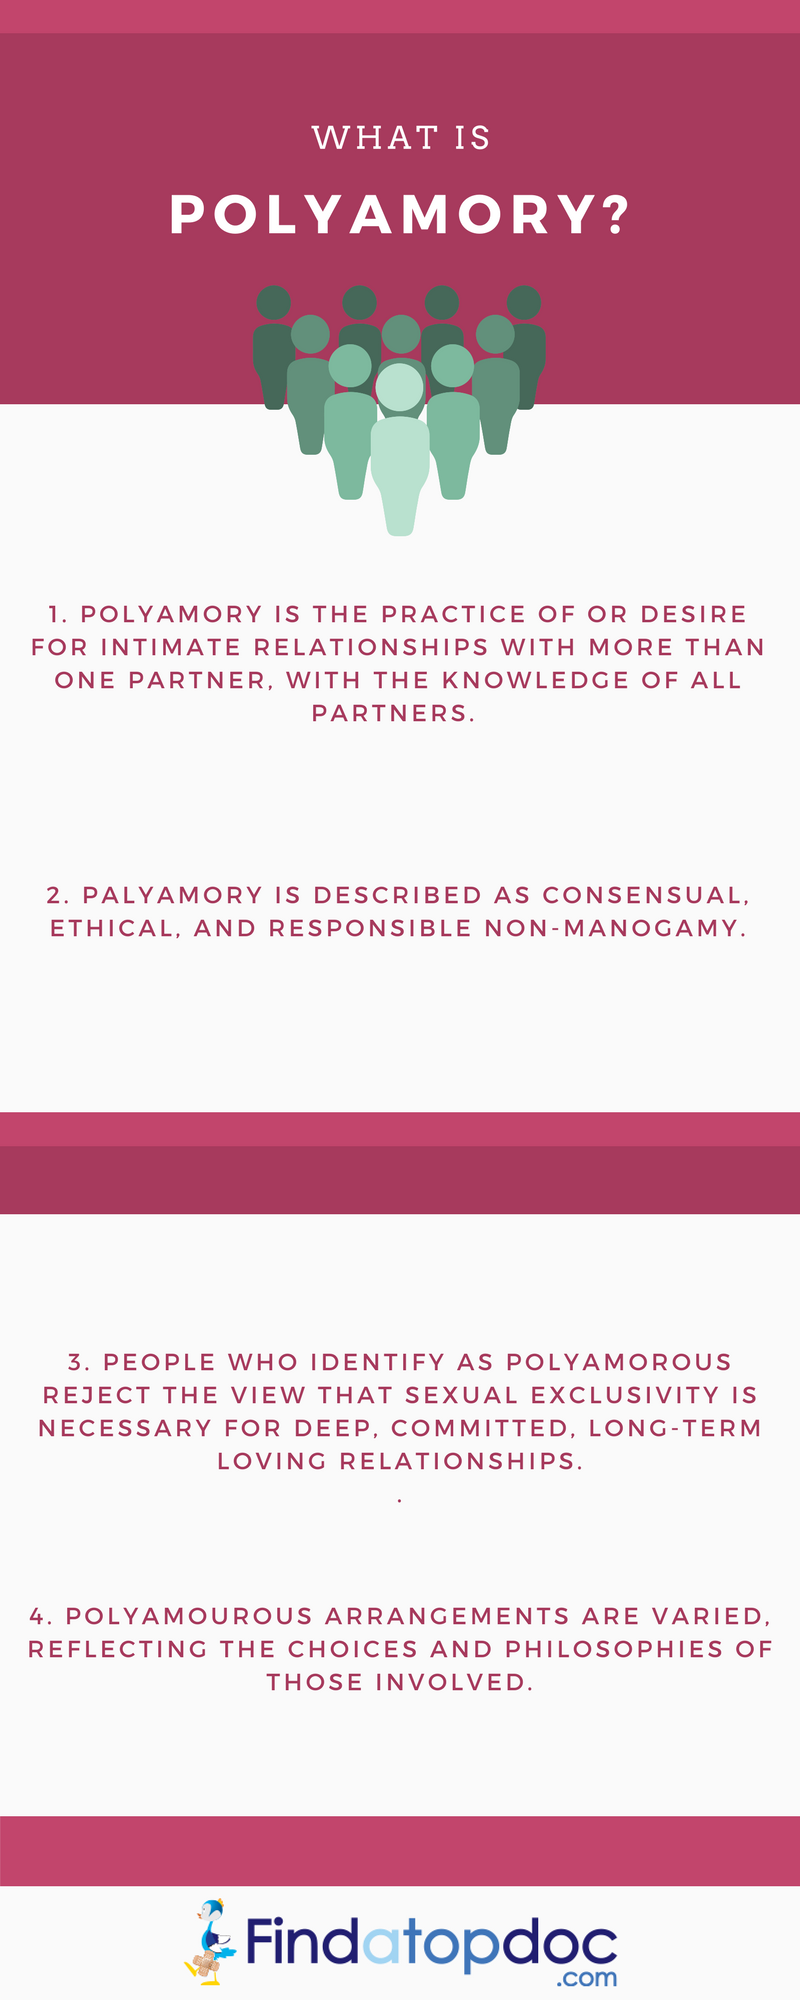 Poly dating sites ontario